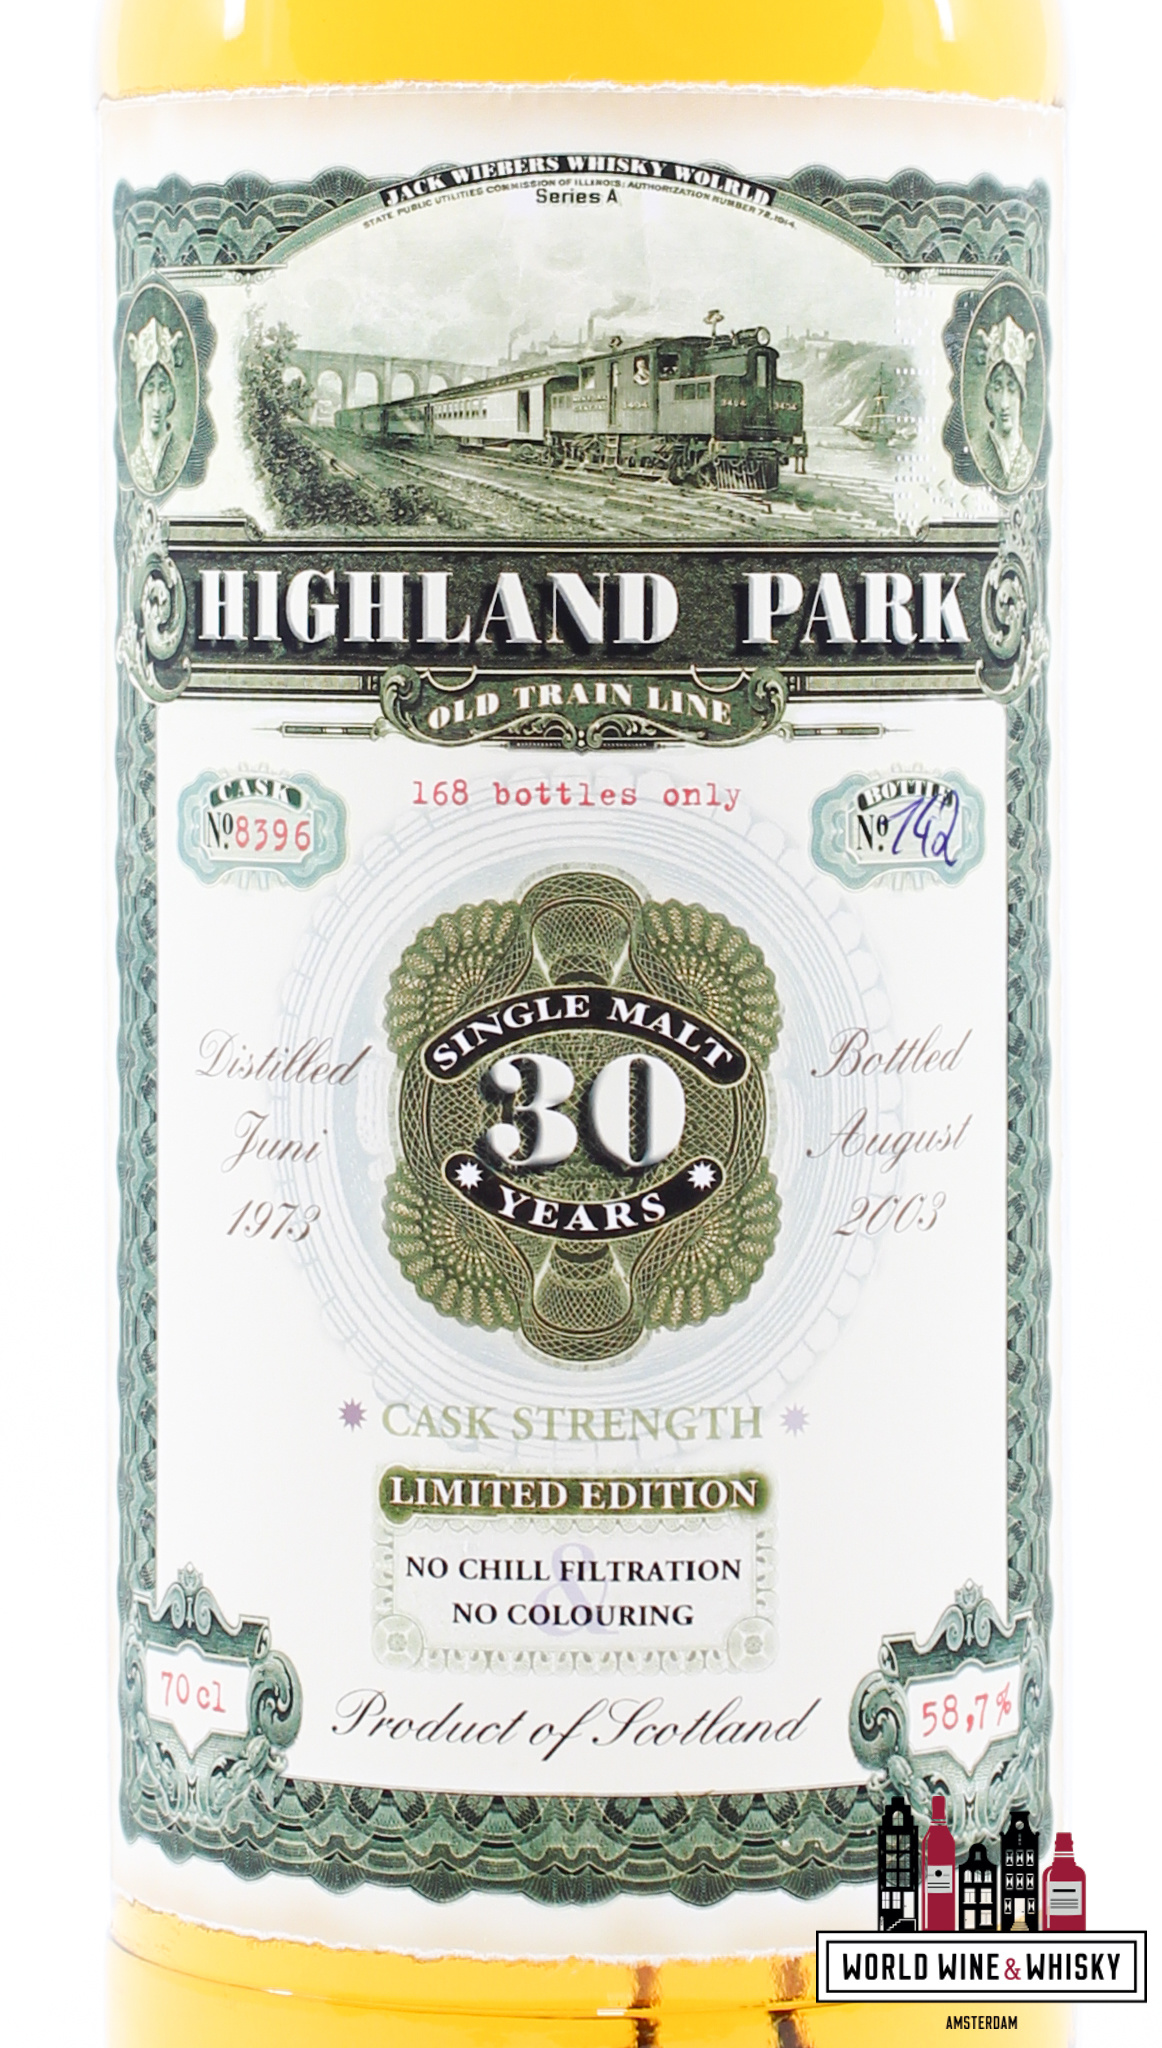 Highland Park Highland Park 30 Years Old 1973 2003 - Old Train Line - Jack Wiebers Whisky World - Cask 8396 58.7% (1 of 168)